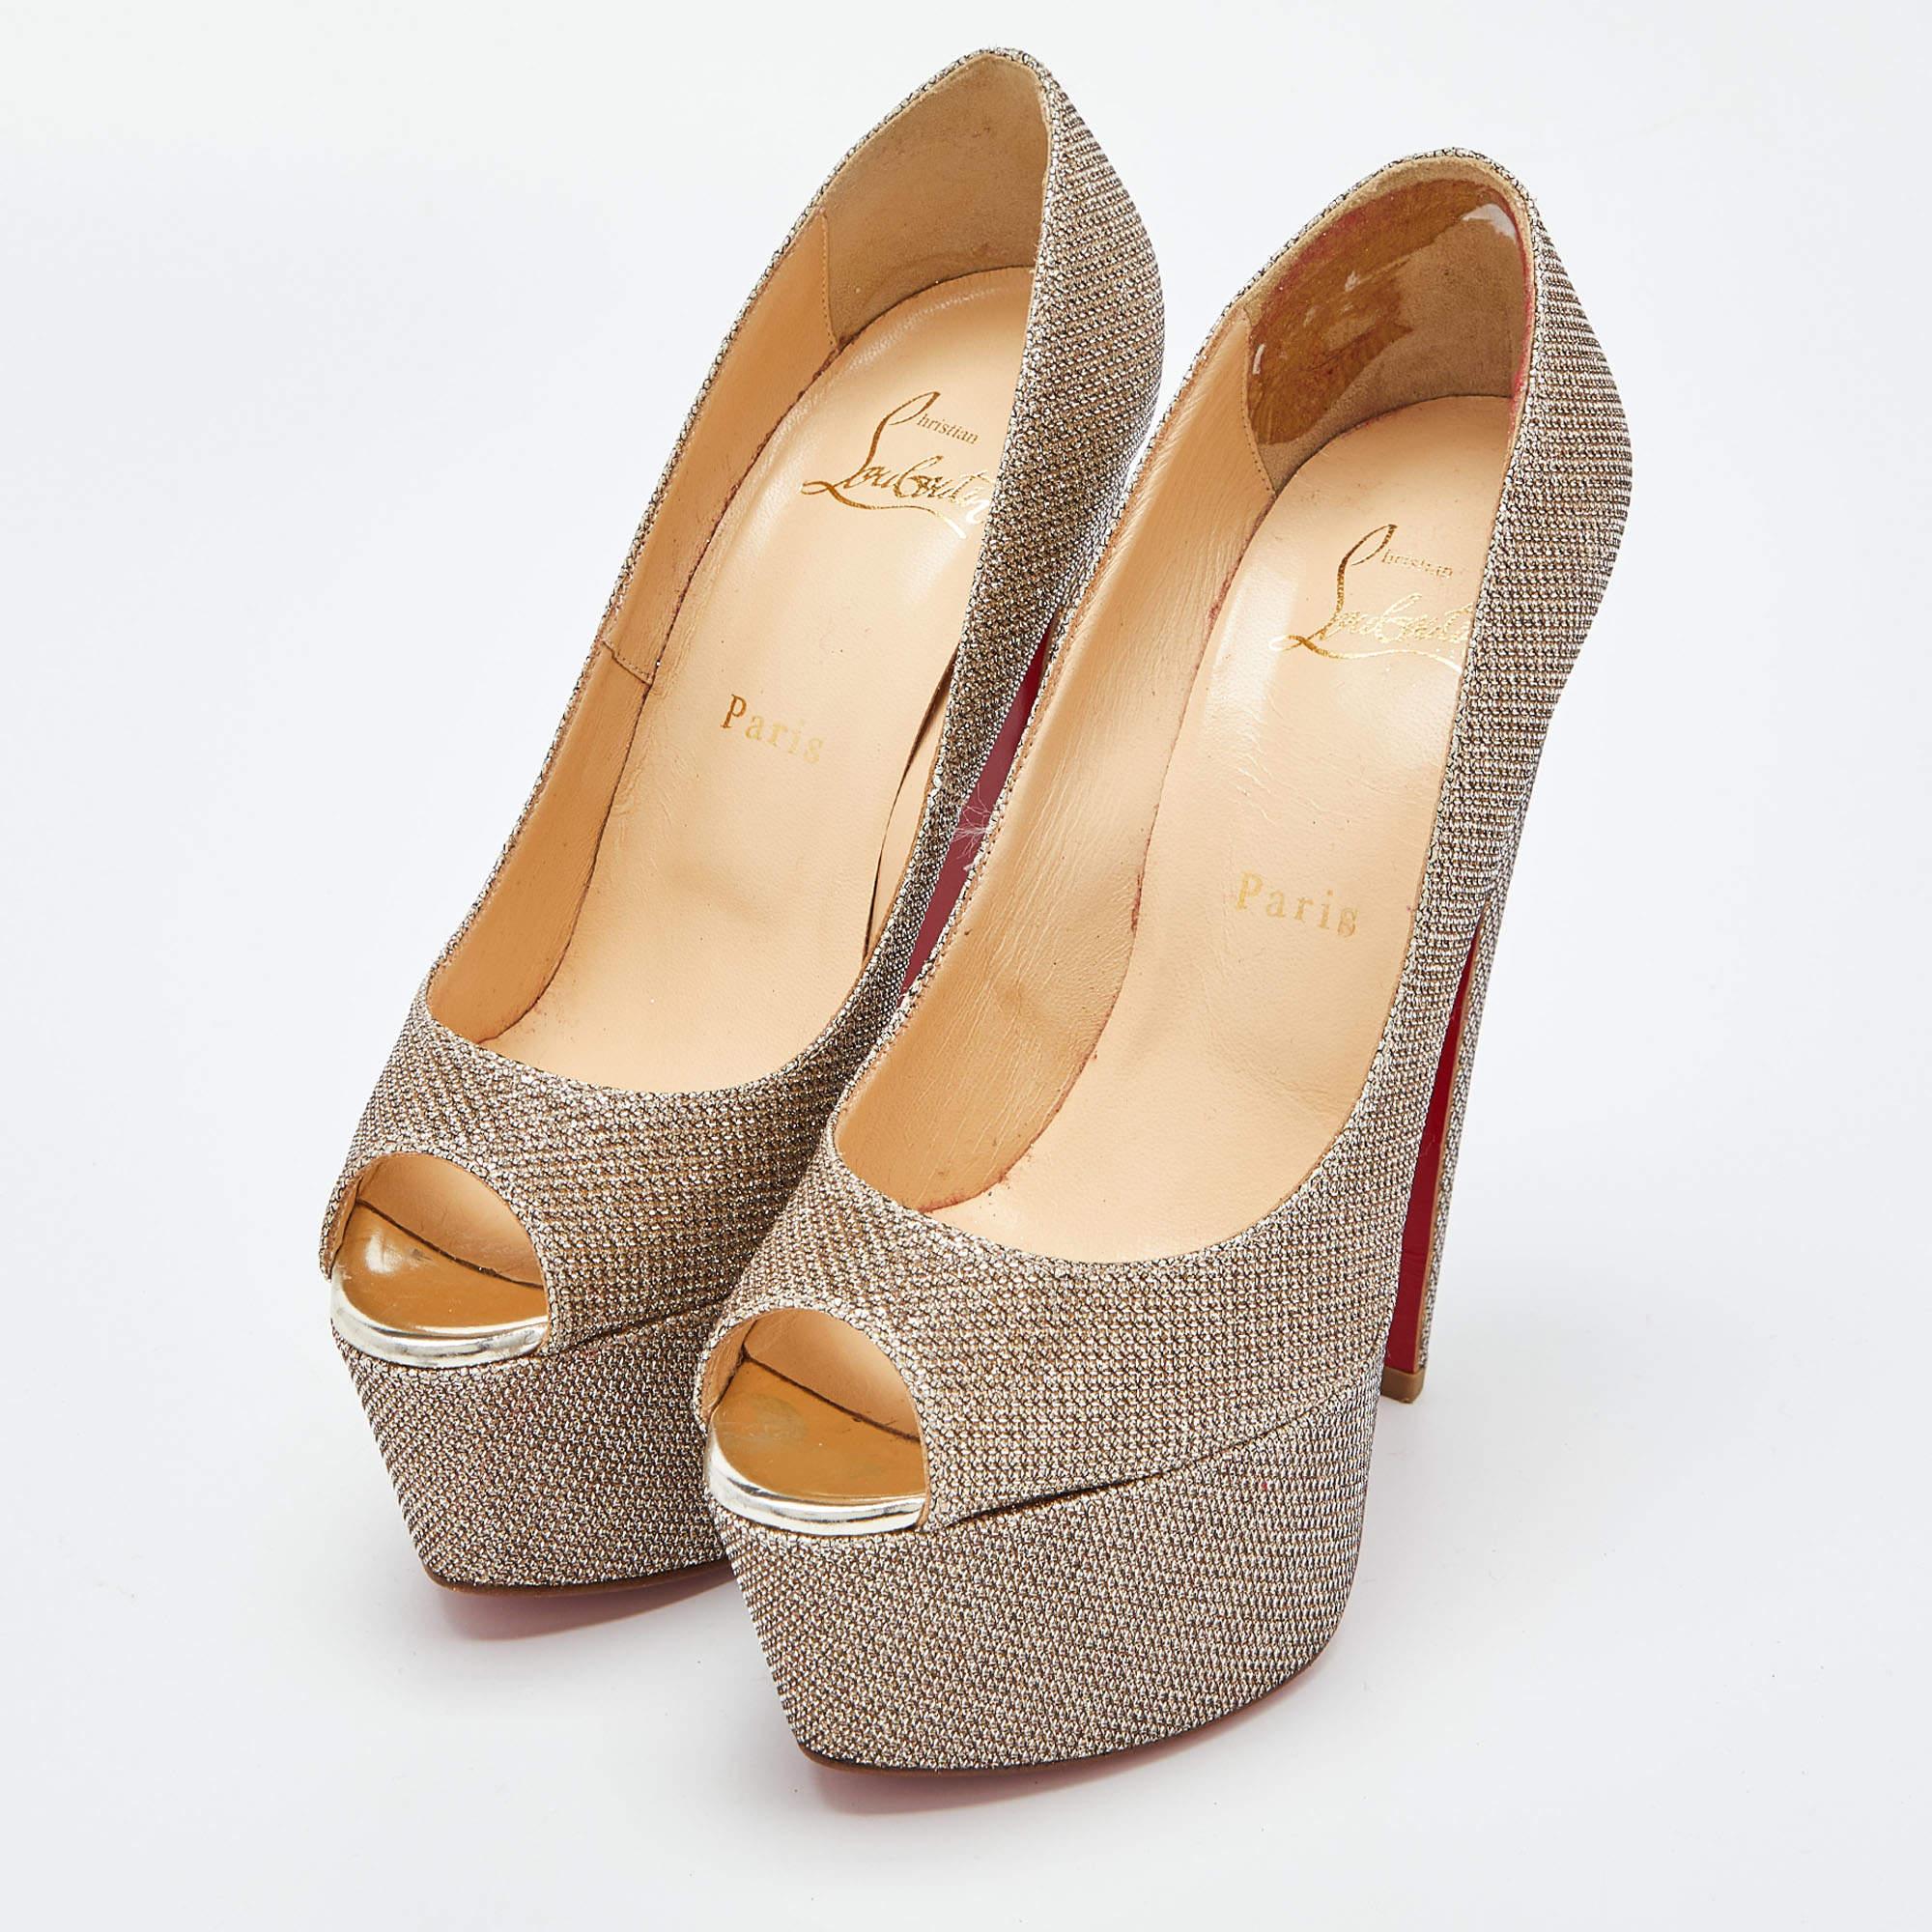 Strike a bold finish to your party outfit by wearing these stunning Christian Louboutin Highness pumps. Crafted with gold lurex fabric, they feature an impressive peep toe, high platforms, and tall heels.

Includes: Original Dustbag, Original Box,